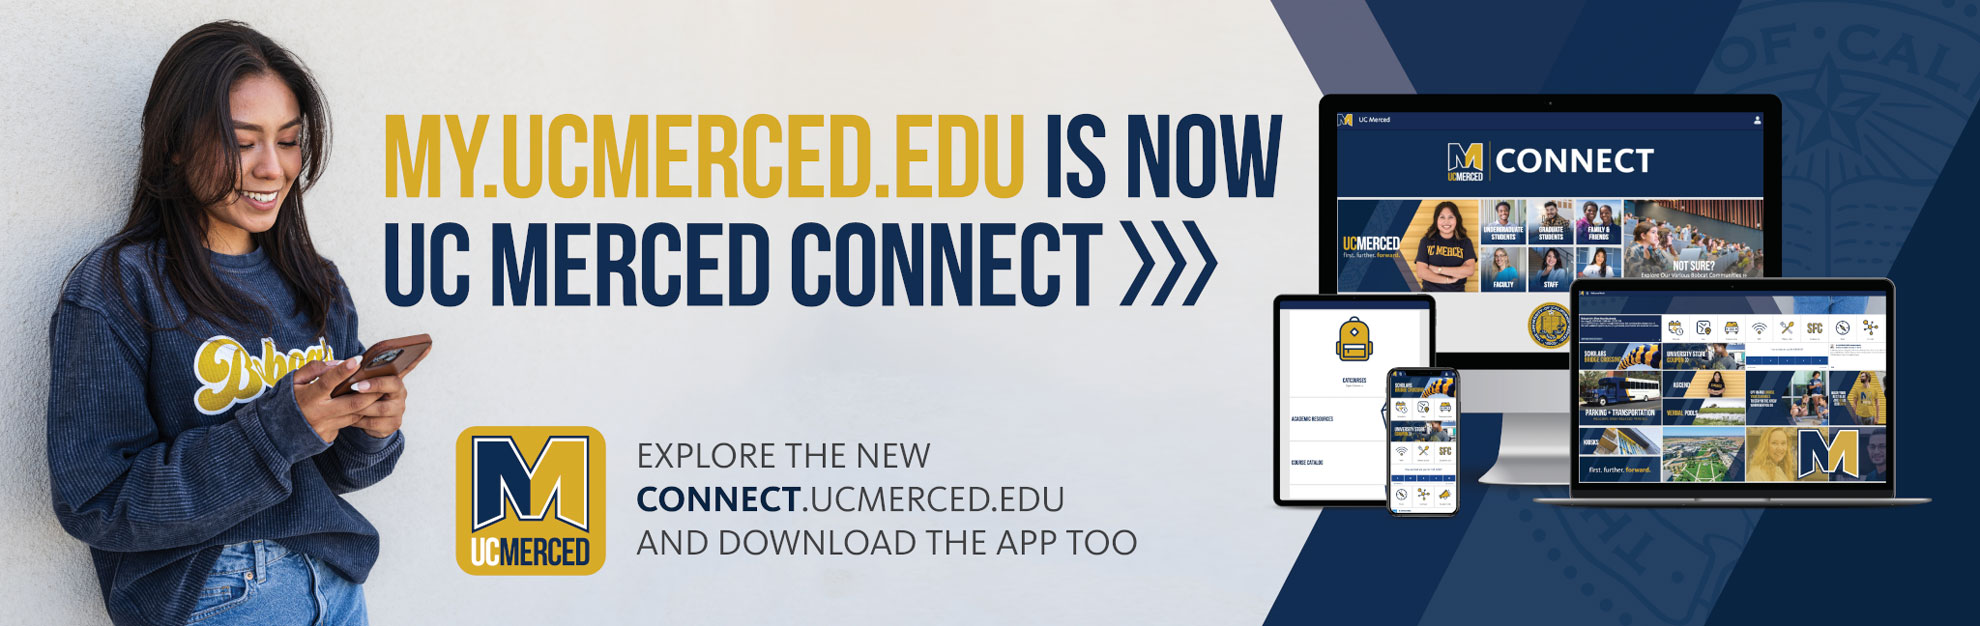 UC Merced Connect